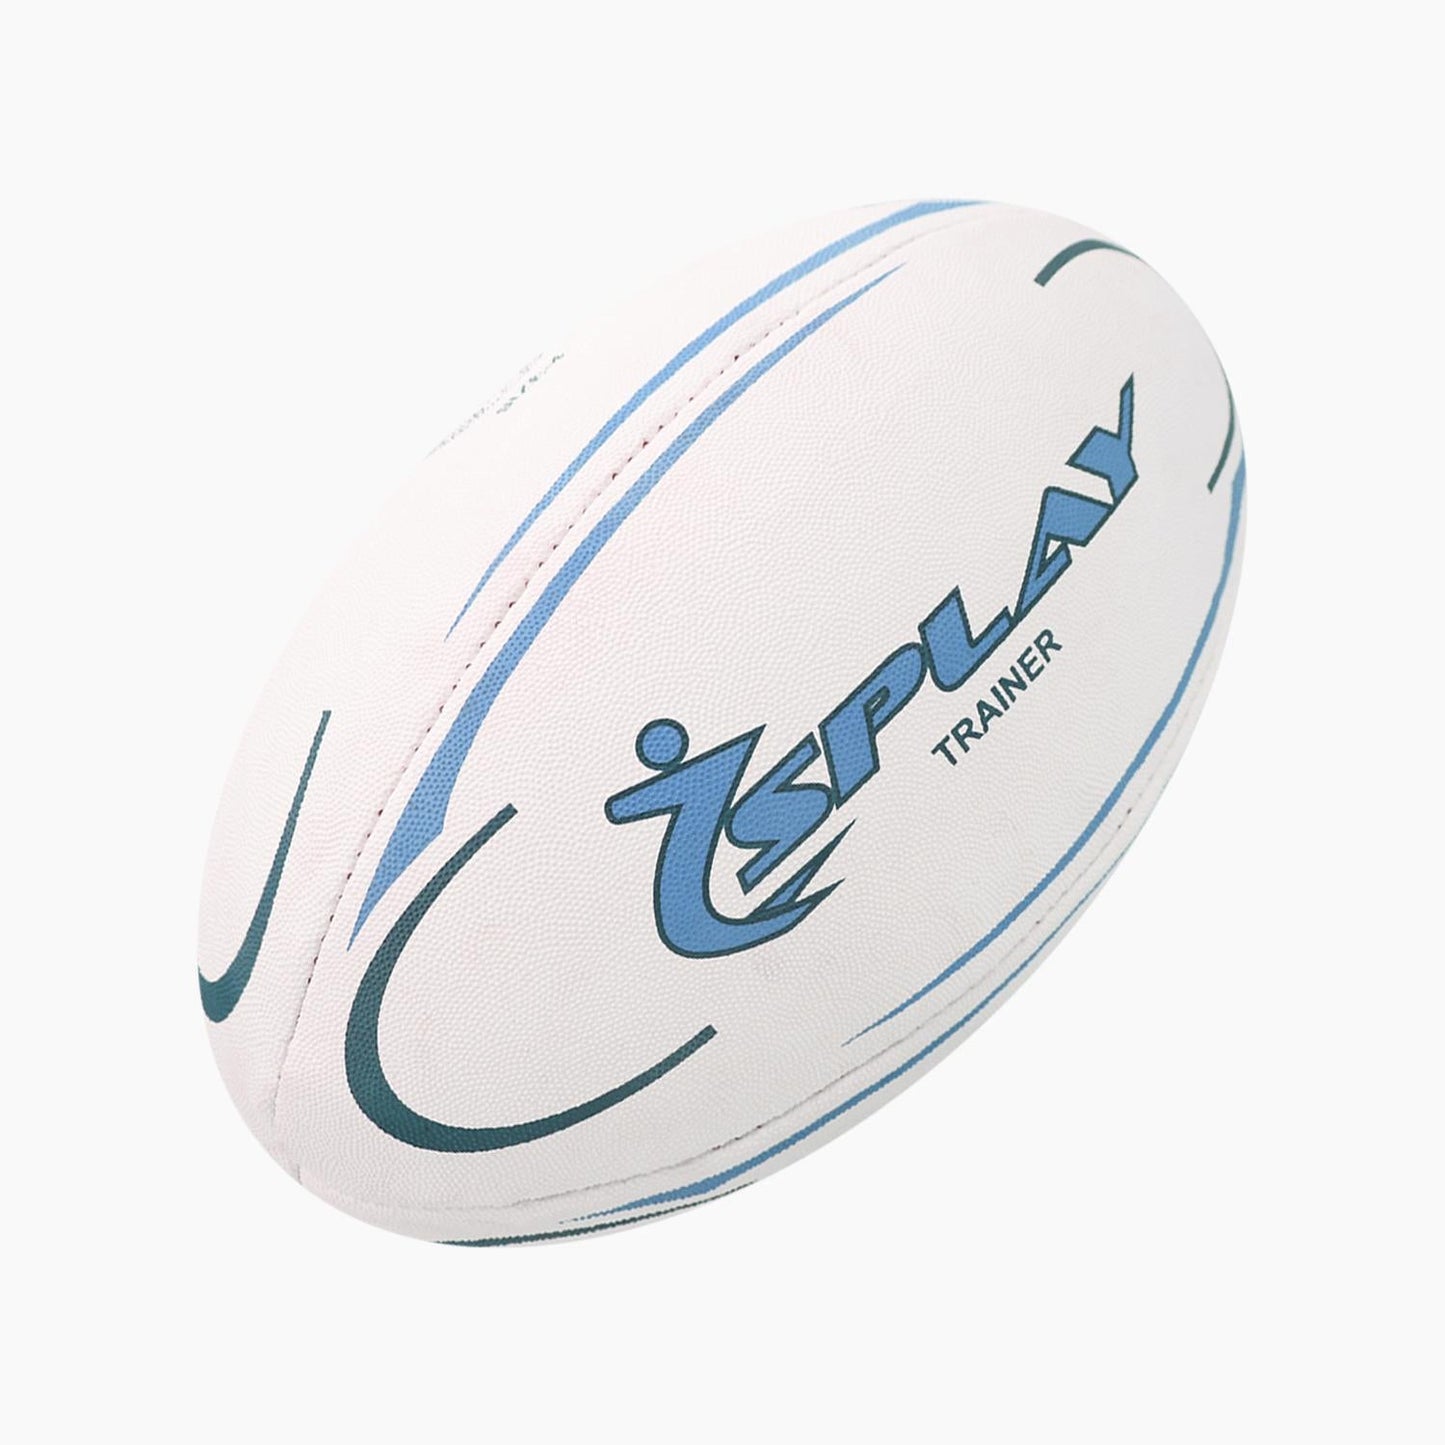 Buy Splay Trainer Rugby Ball-Rugby Ball-Splay (UK) Limited-Blue-3-Splay UK Online